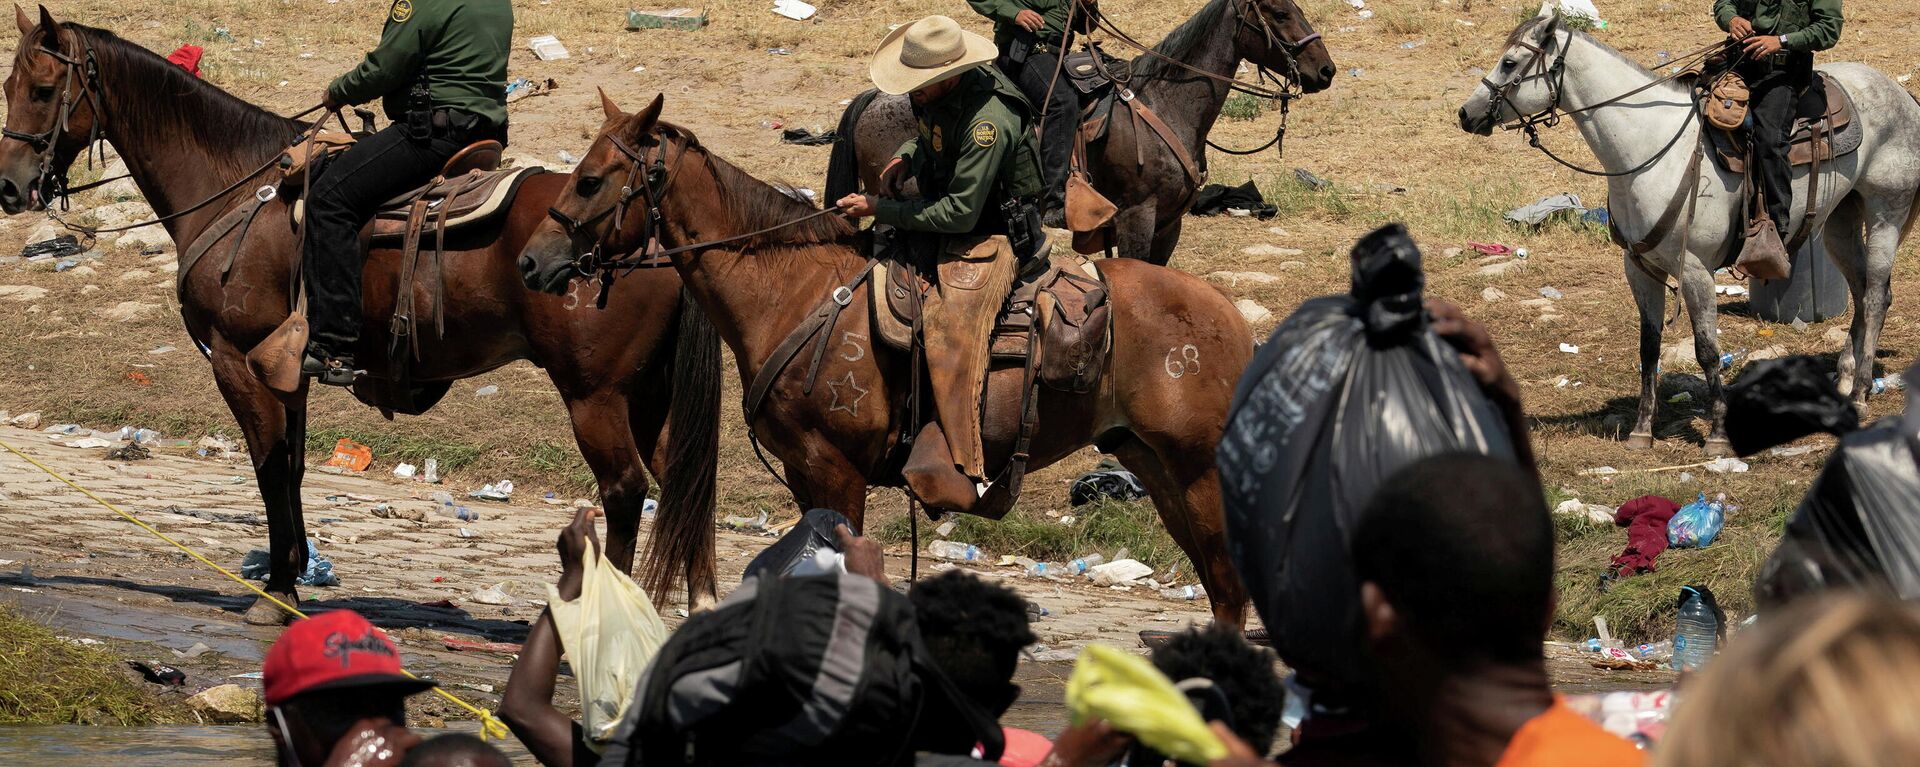 Migrants seeking asylum in the U.S. cross the Rio Grande river into the U.S. after obtaining food and supplies in Mexico as the U.S. Border Patrol agents monitor on a horse on the U.S. side of the bank near the International Bridge between Mexico and the U.S., in Del Rio Texas, U.S., where they wait to be processed, as seen from Ciudad Acuna, Mexico, September 20, 2021. - Sputnik International, 1920, 21.09.2021